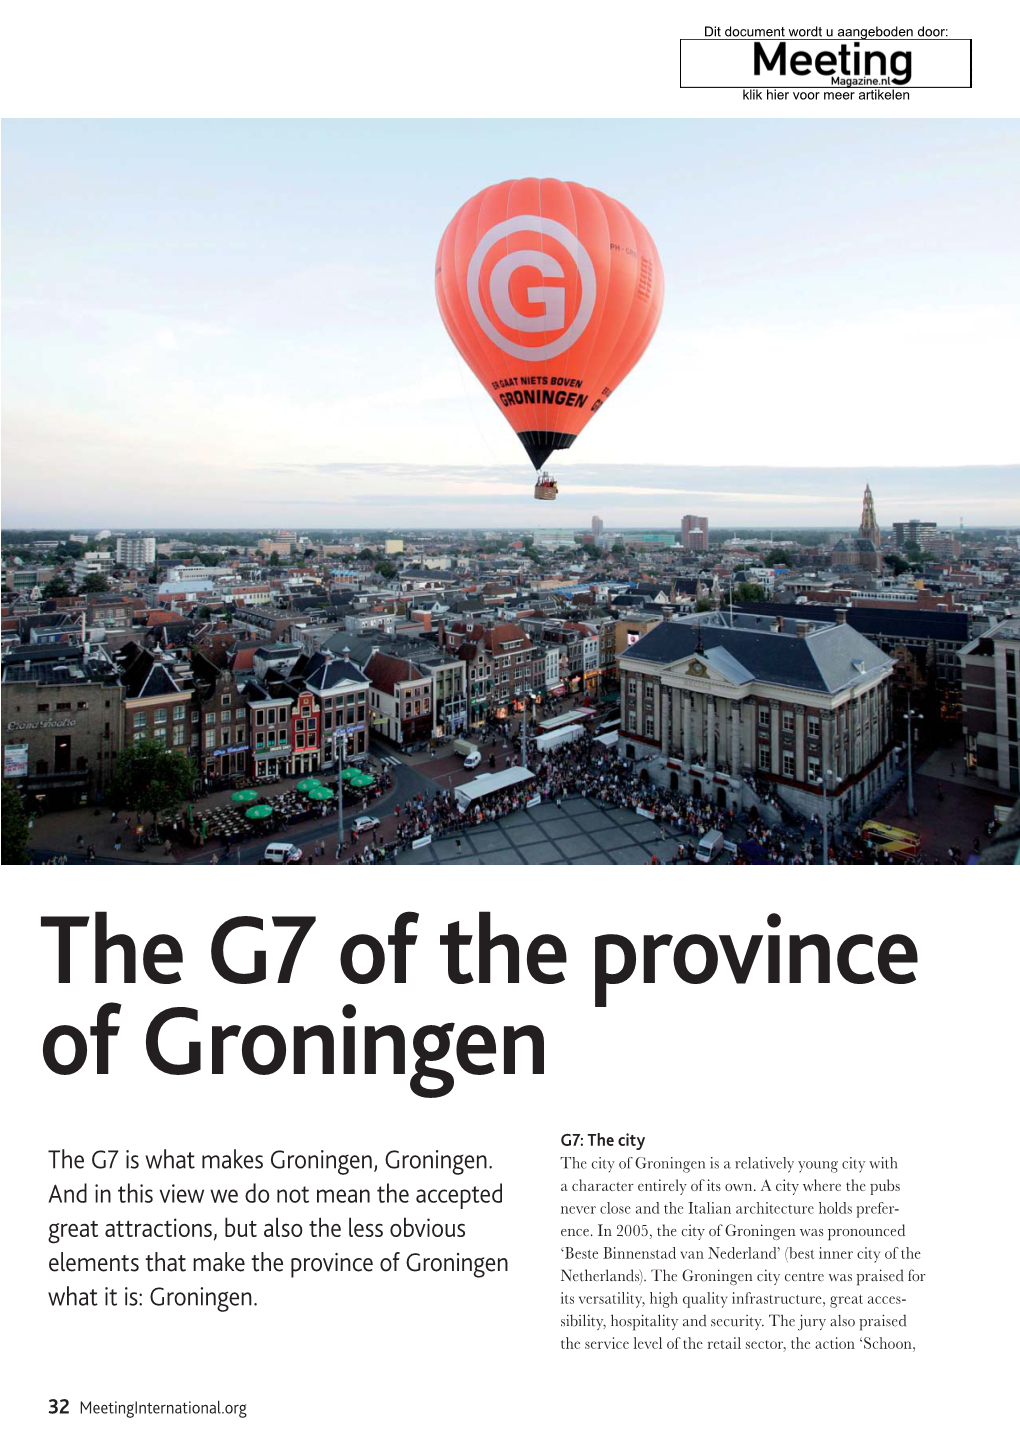 The G7 of the Province of Groningen